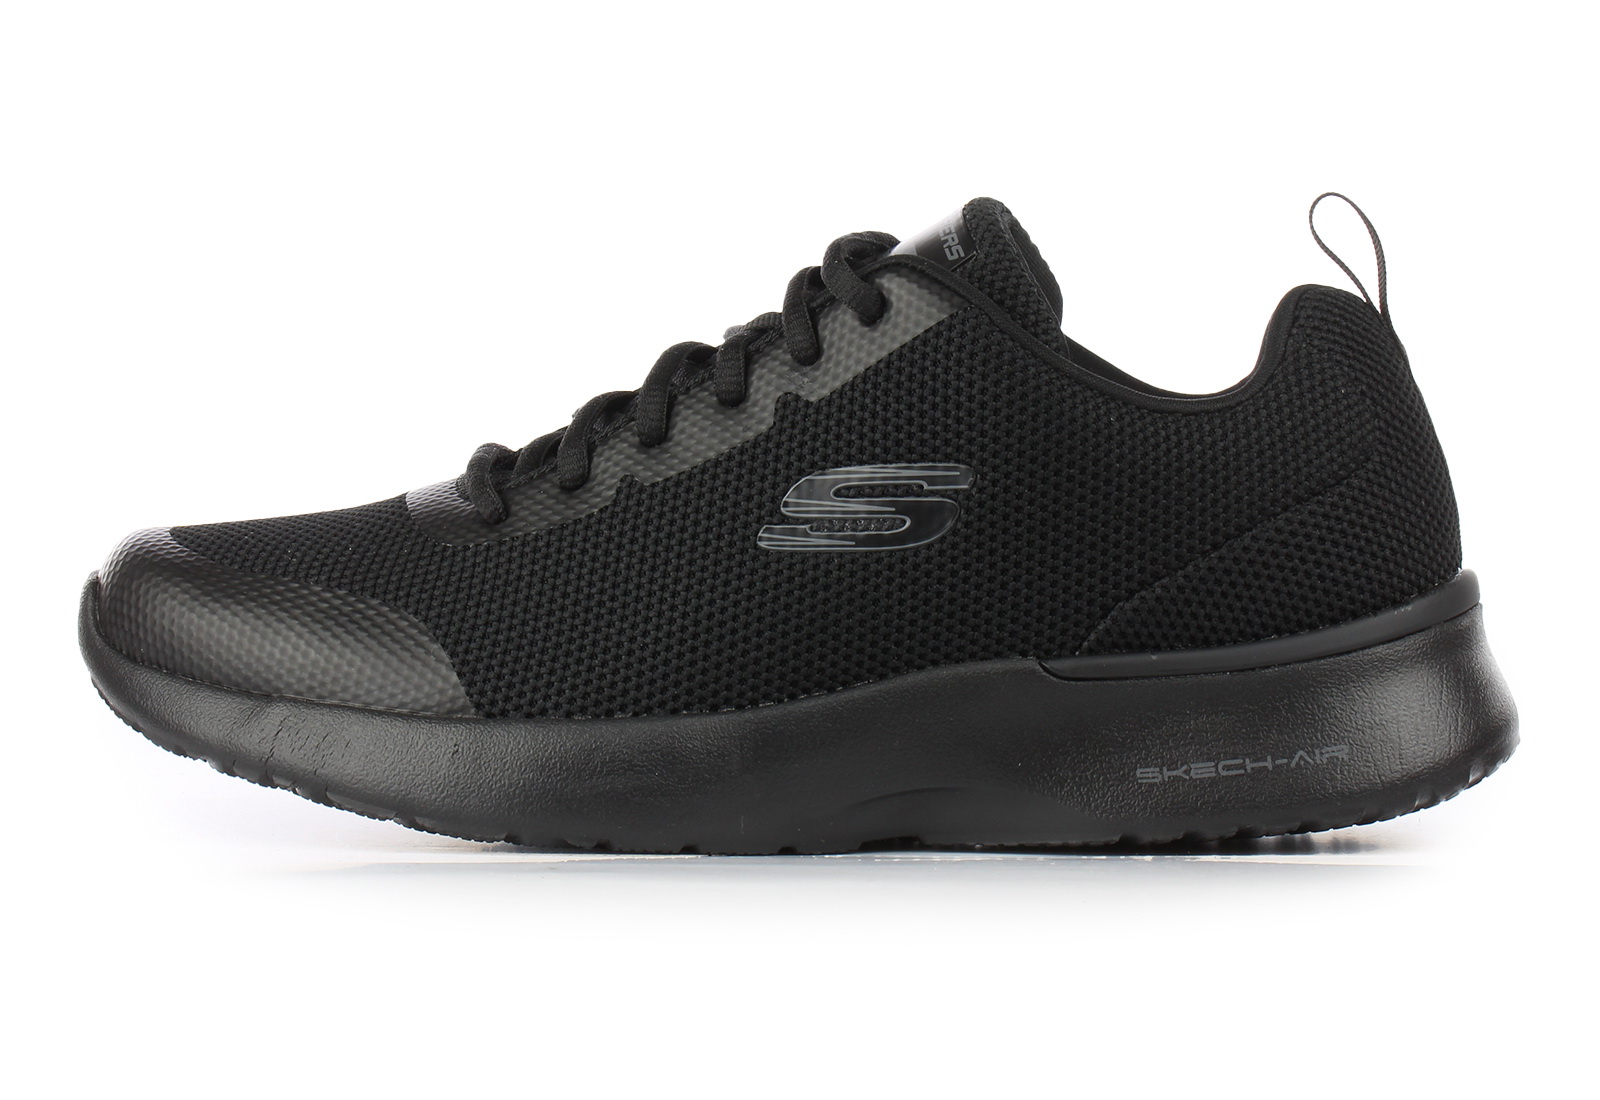 skechers air dynamight winly